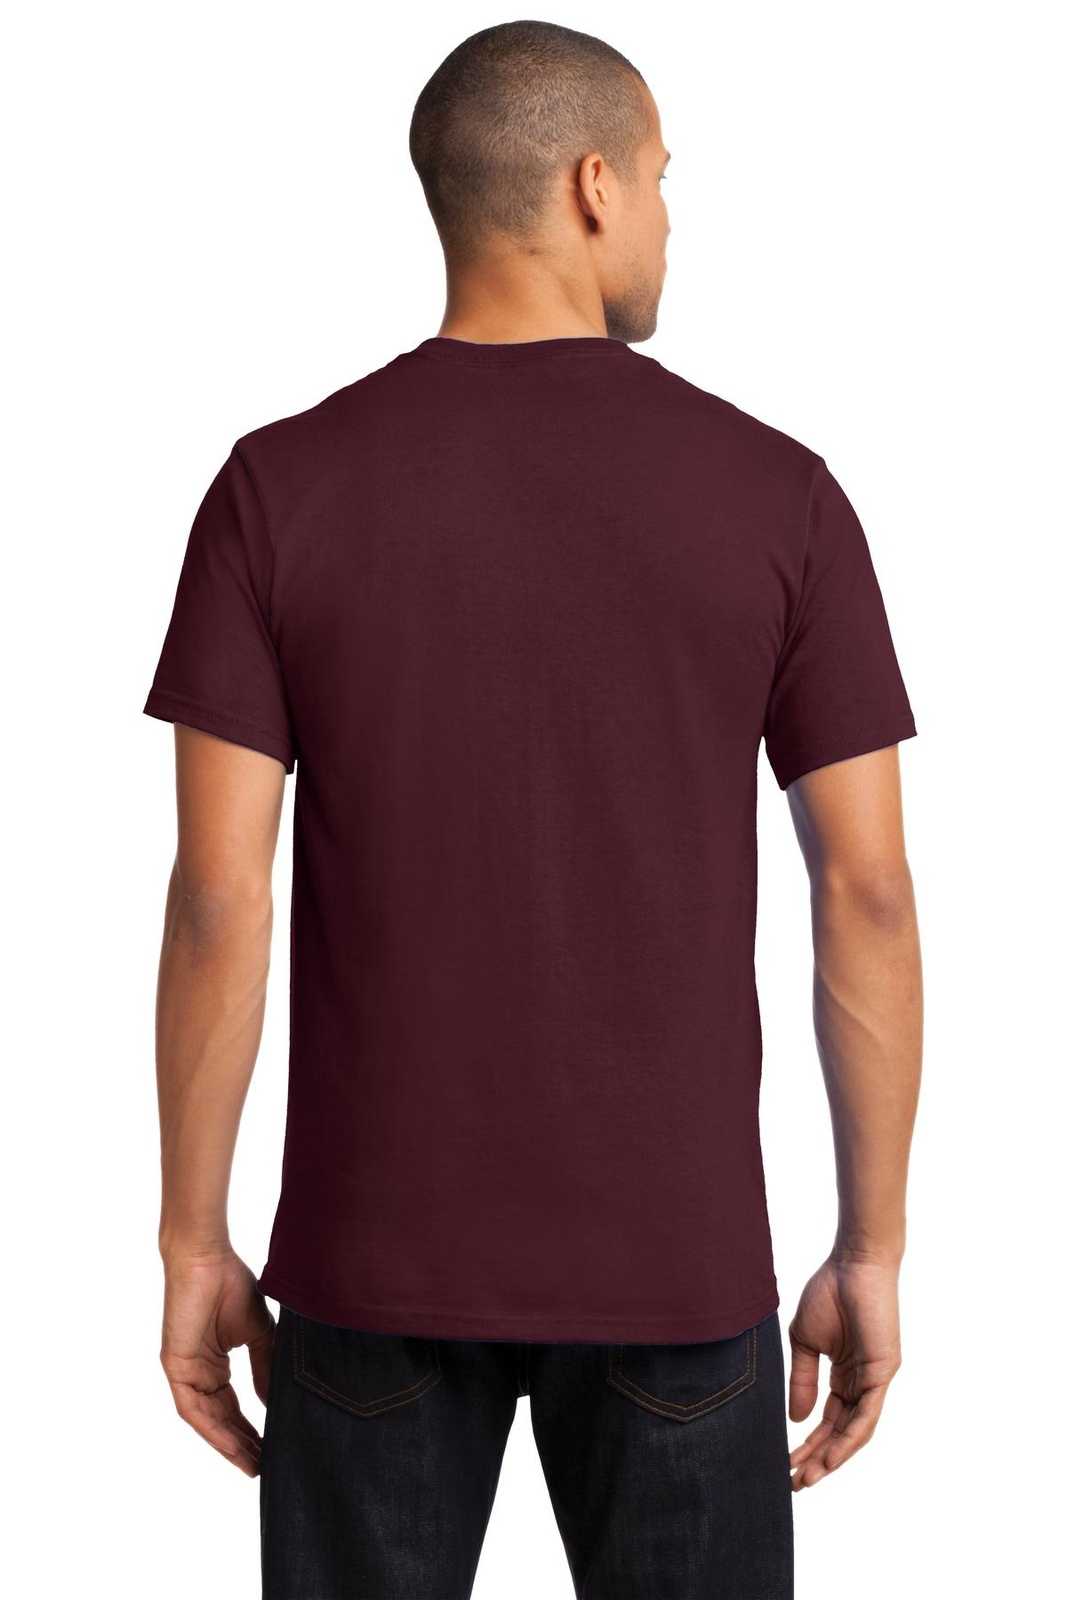 Port & Company PC61P Essential Pocket Tee - Athletic Maroon - HIT a Double - 1